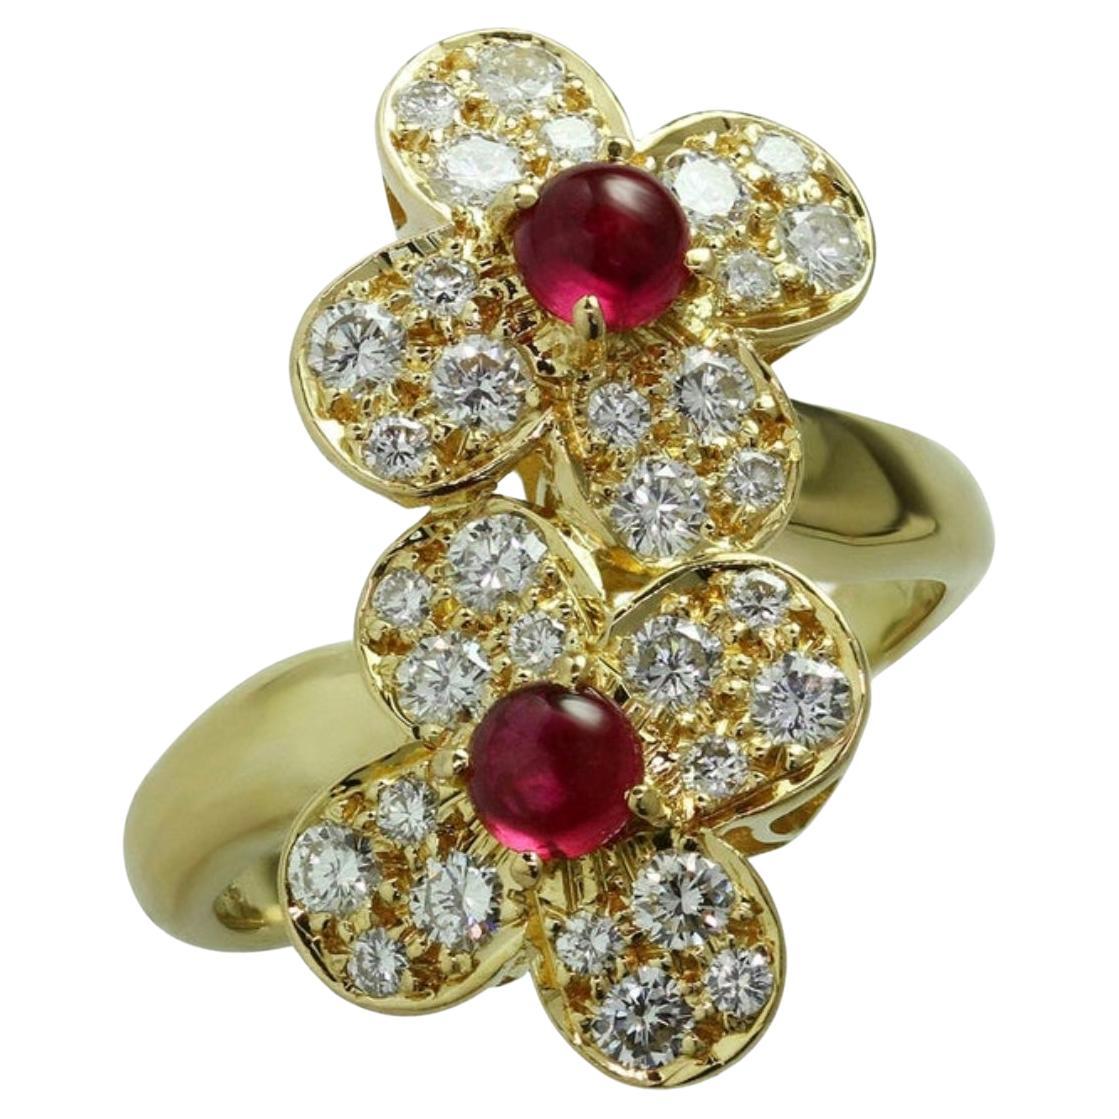 Van Cleef & Arpels Contemporary Ruby and Diamond “Trefle” Ring, 18KY Gold Size 6 For Sale